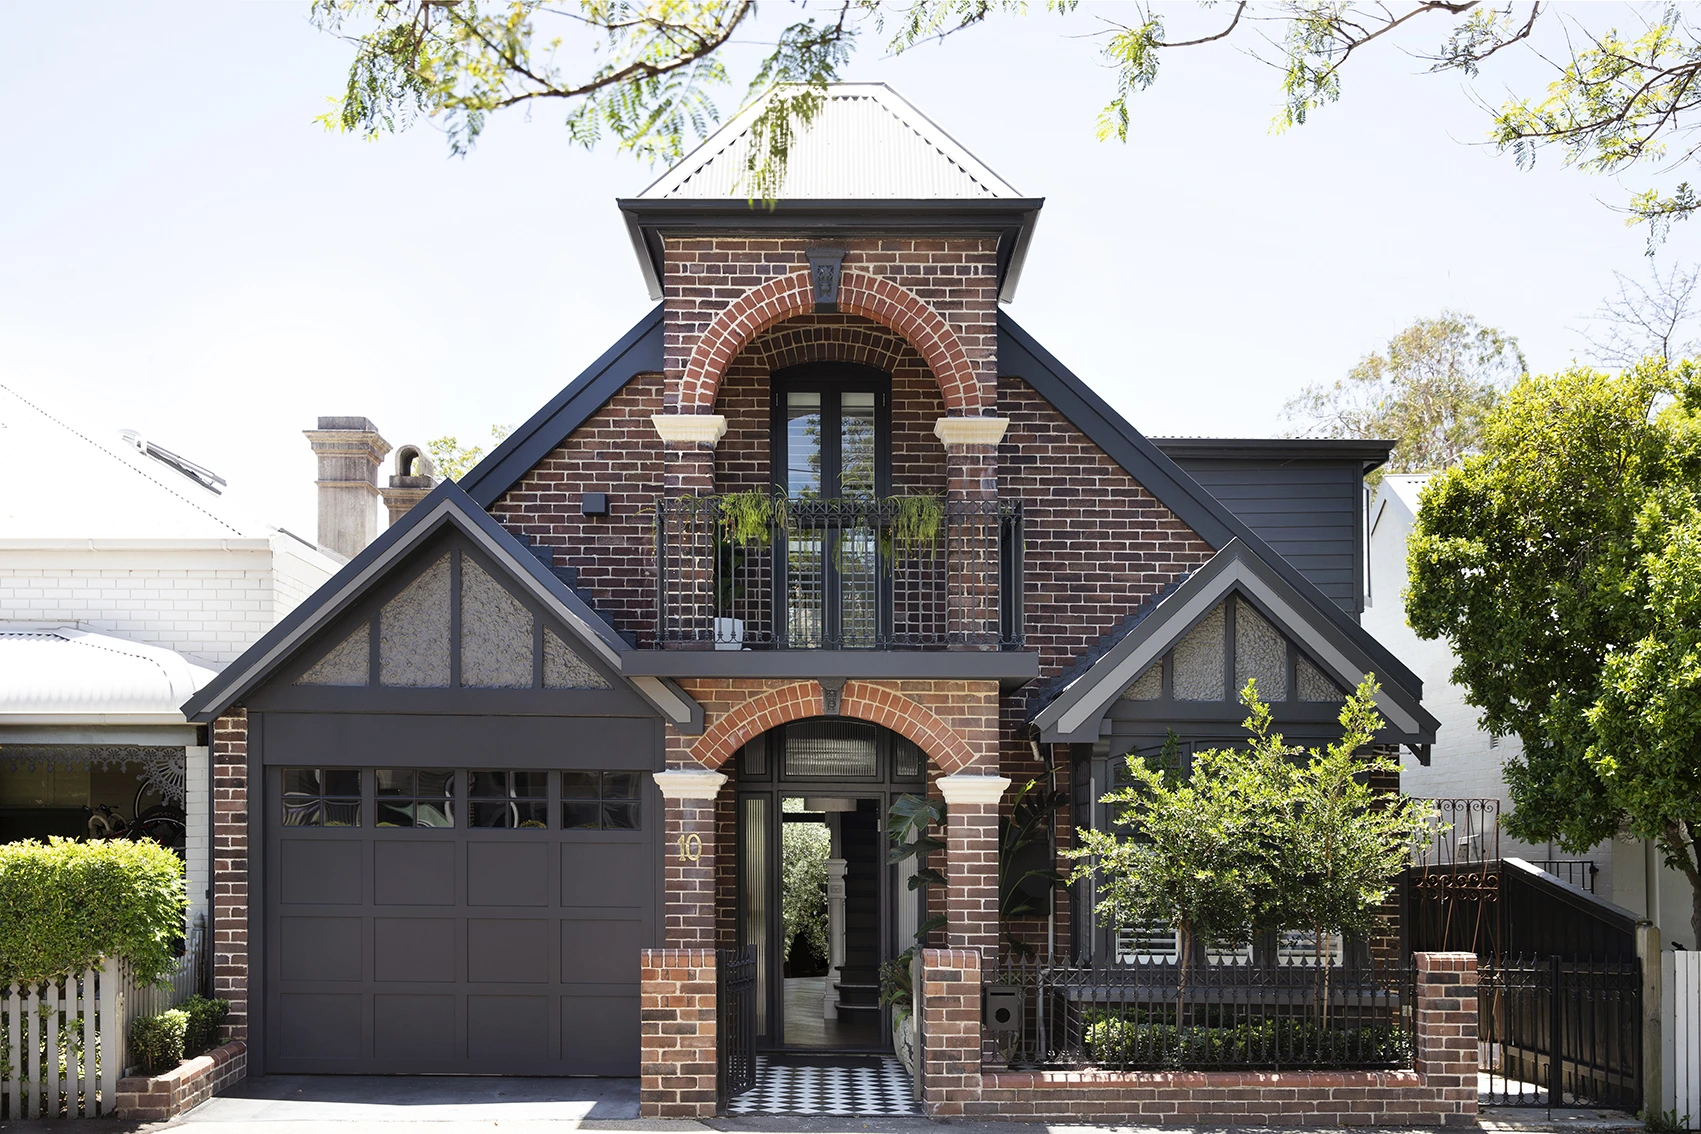 Double-storey red brick federation-style house with black trim